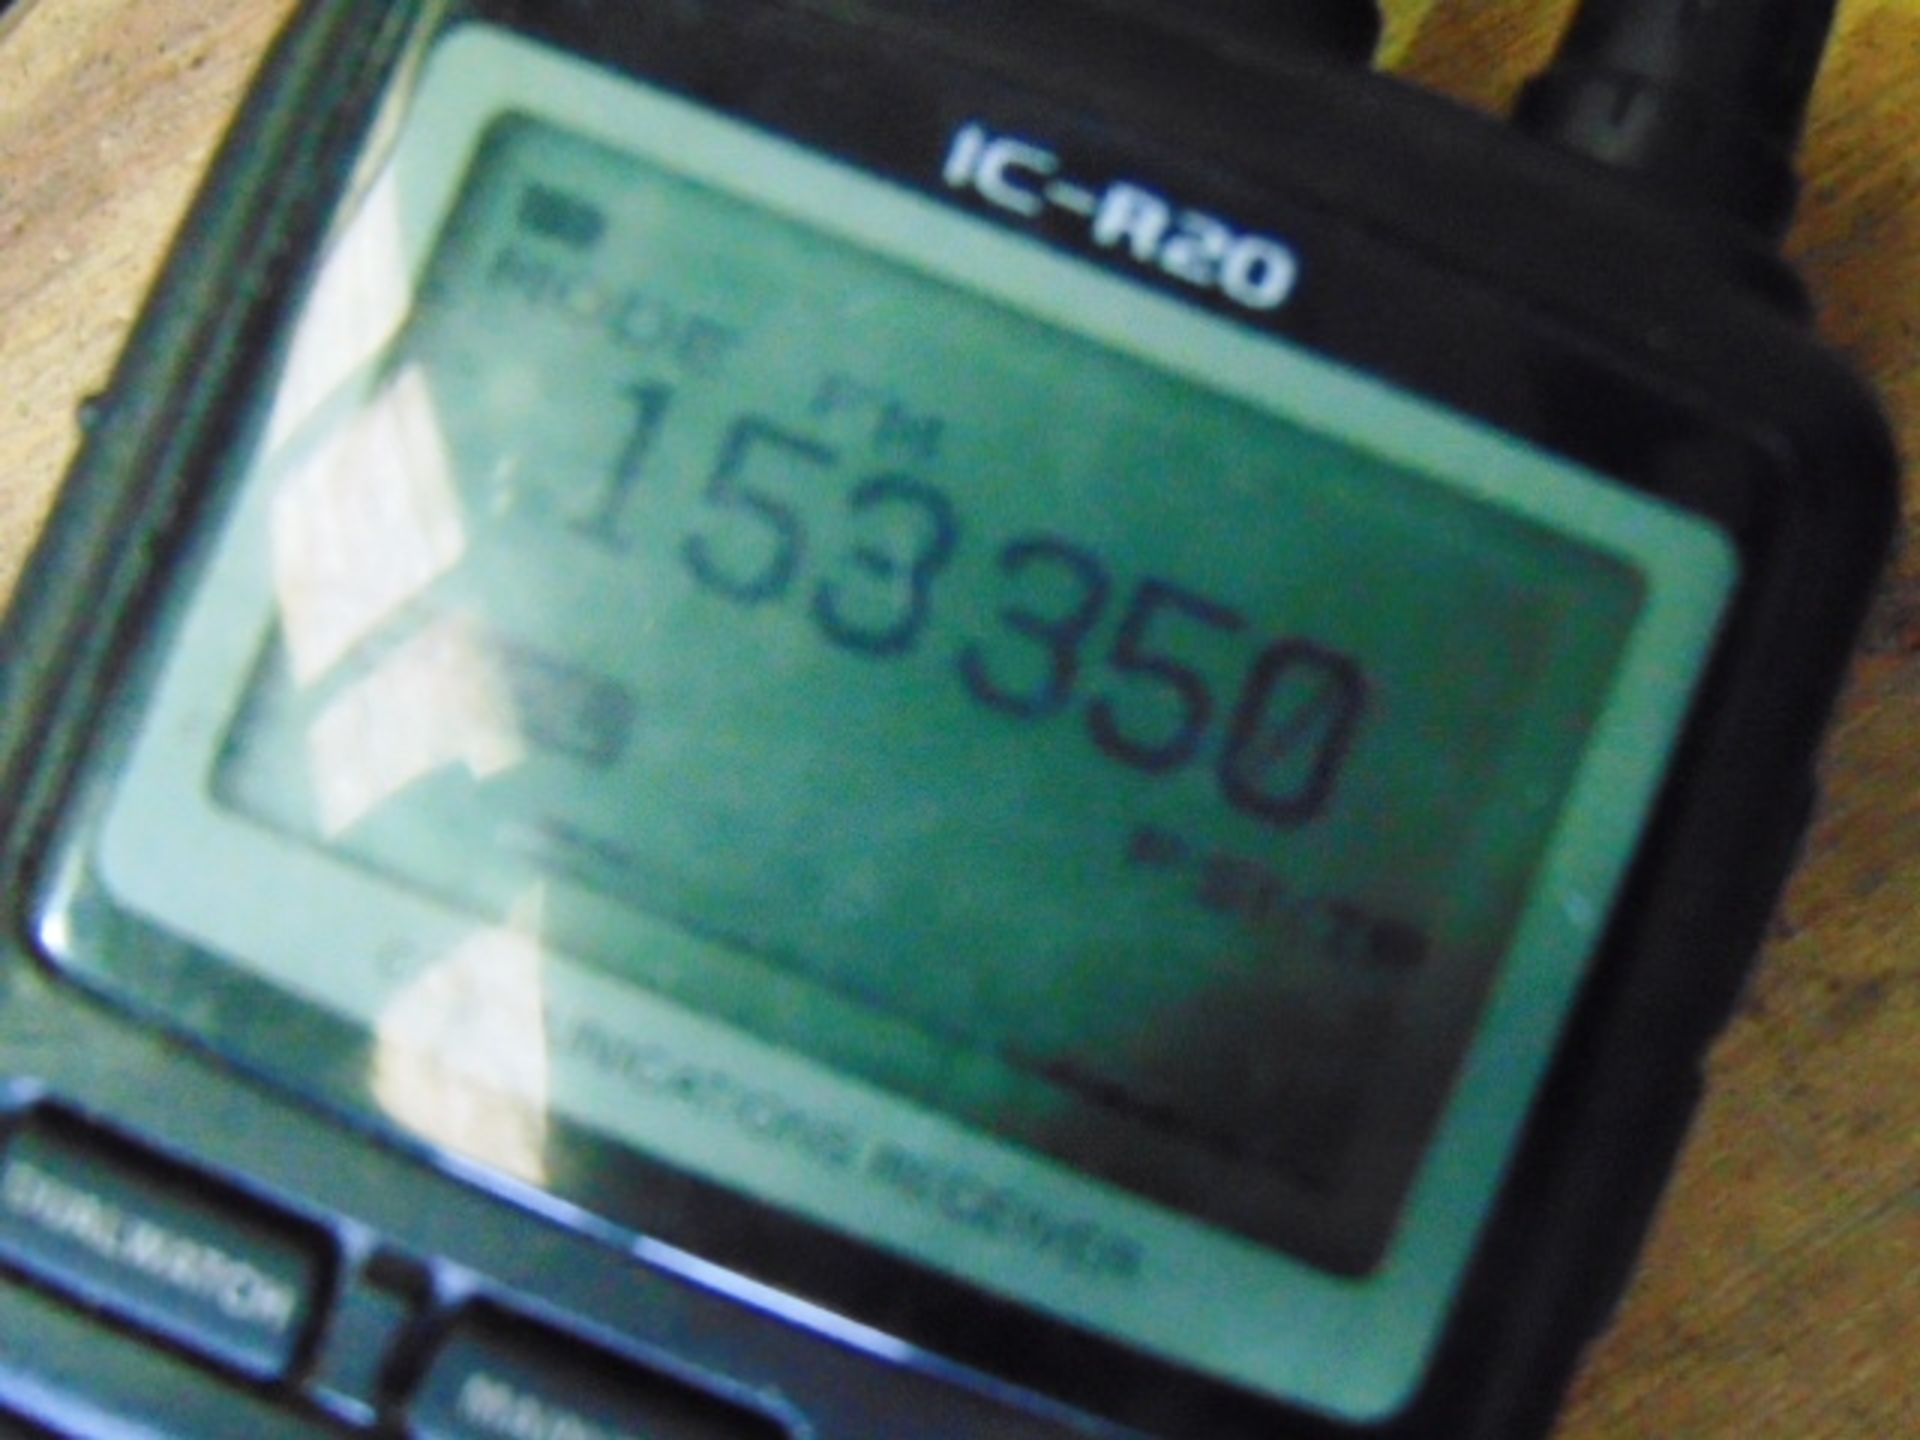 Icom IC-R20 Wideband Scanner Communications Receiver - Image 3 of 9